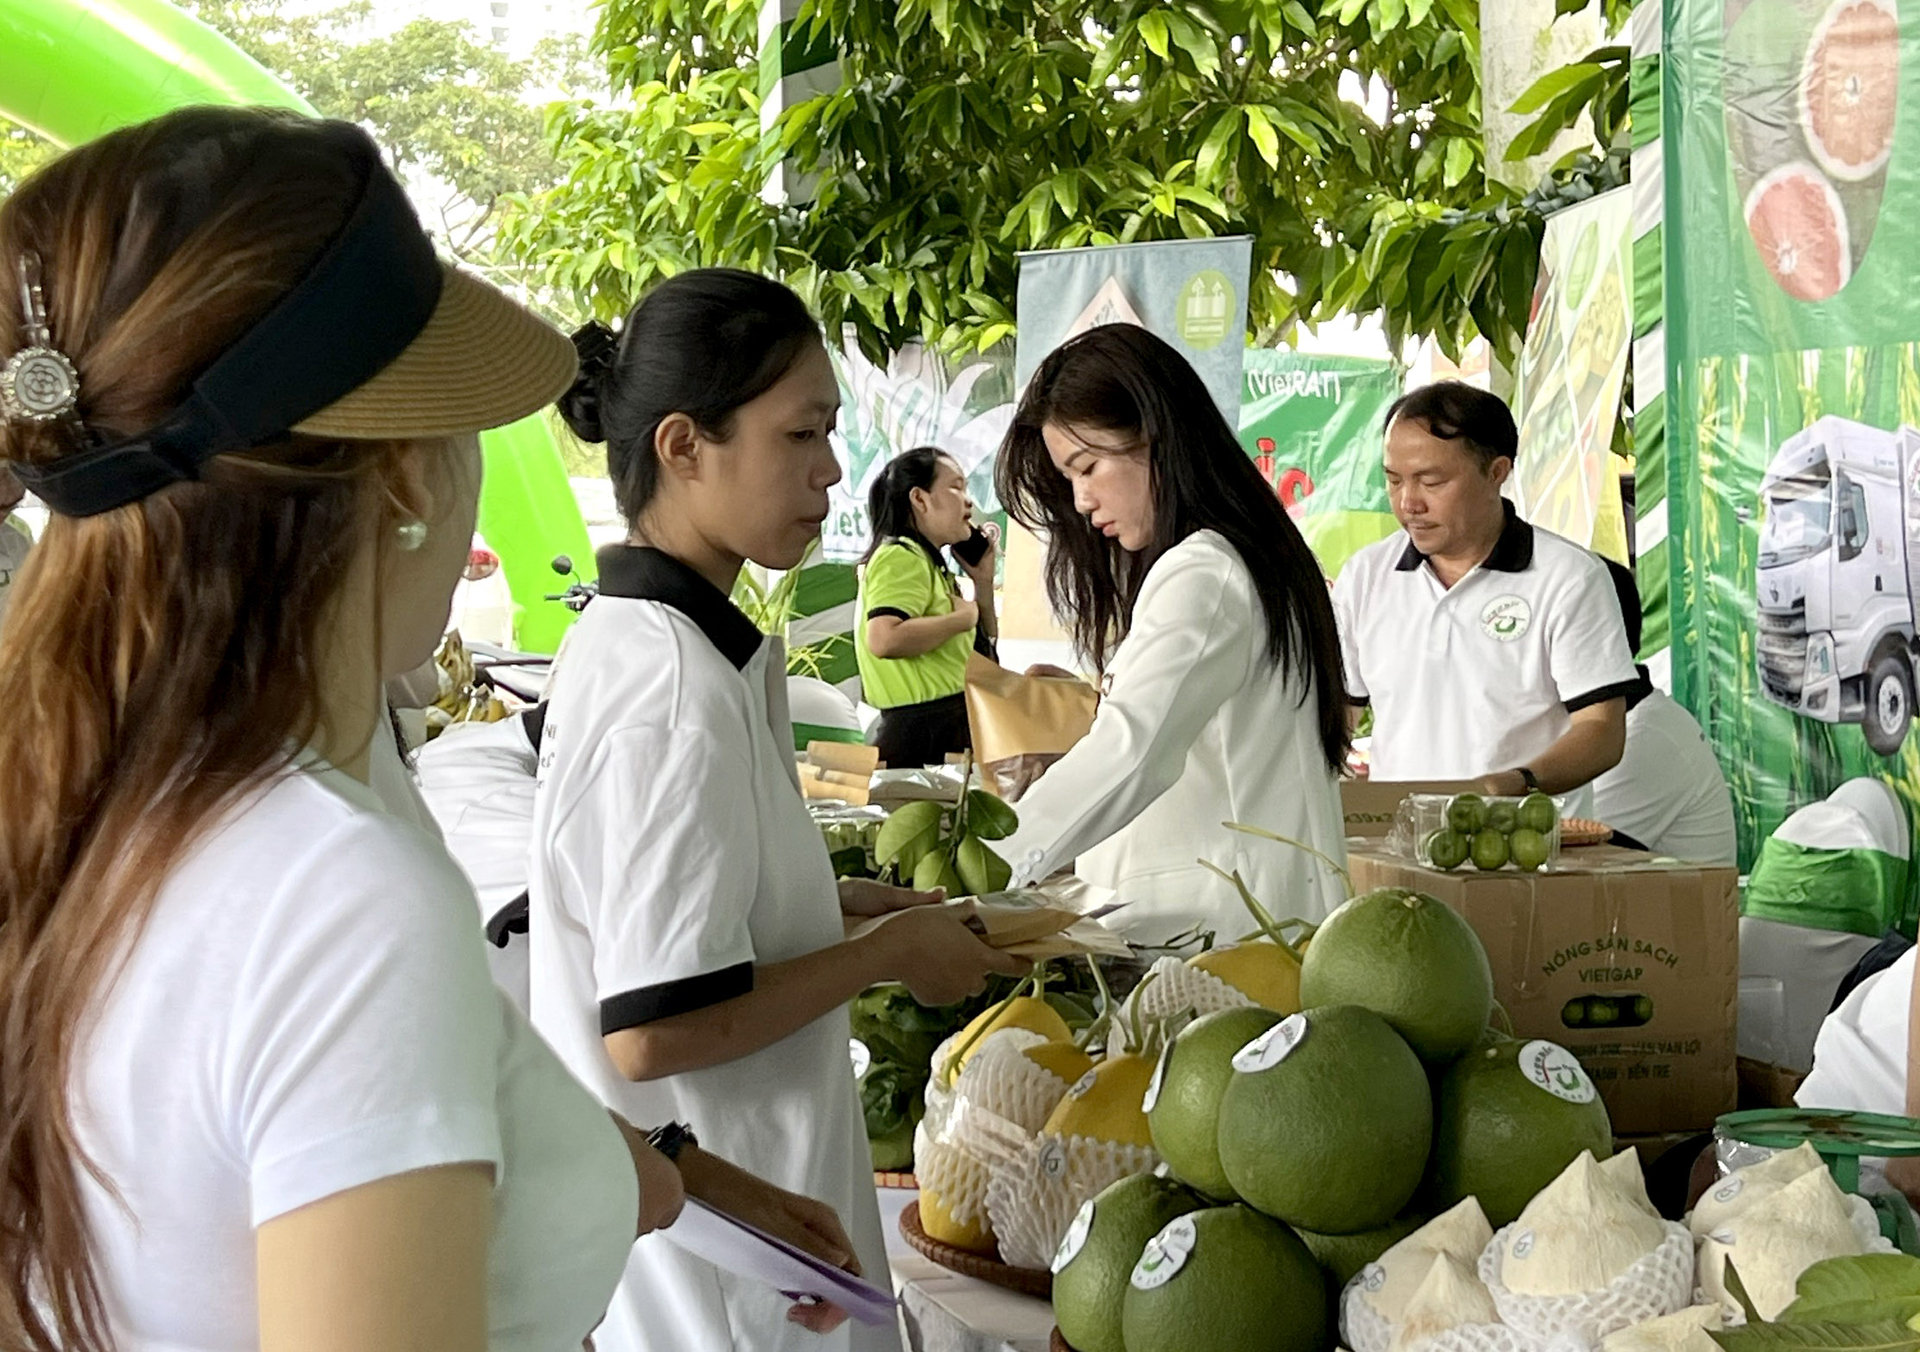 Customers learn about fruit products at Organic Ninh Thuan's stall. Photo: Son Trang.